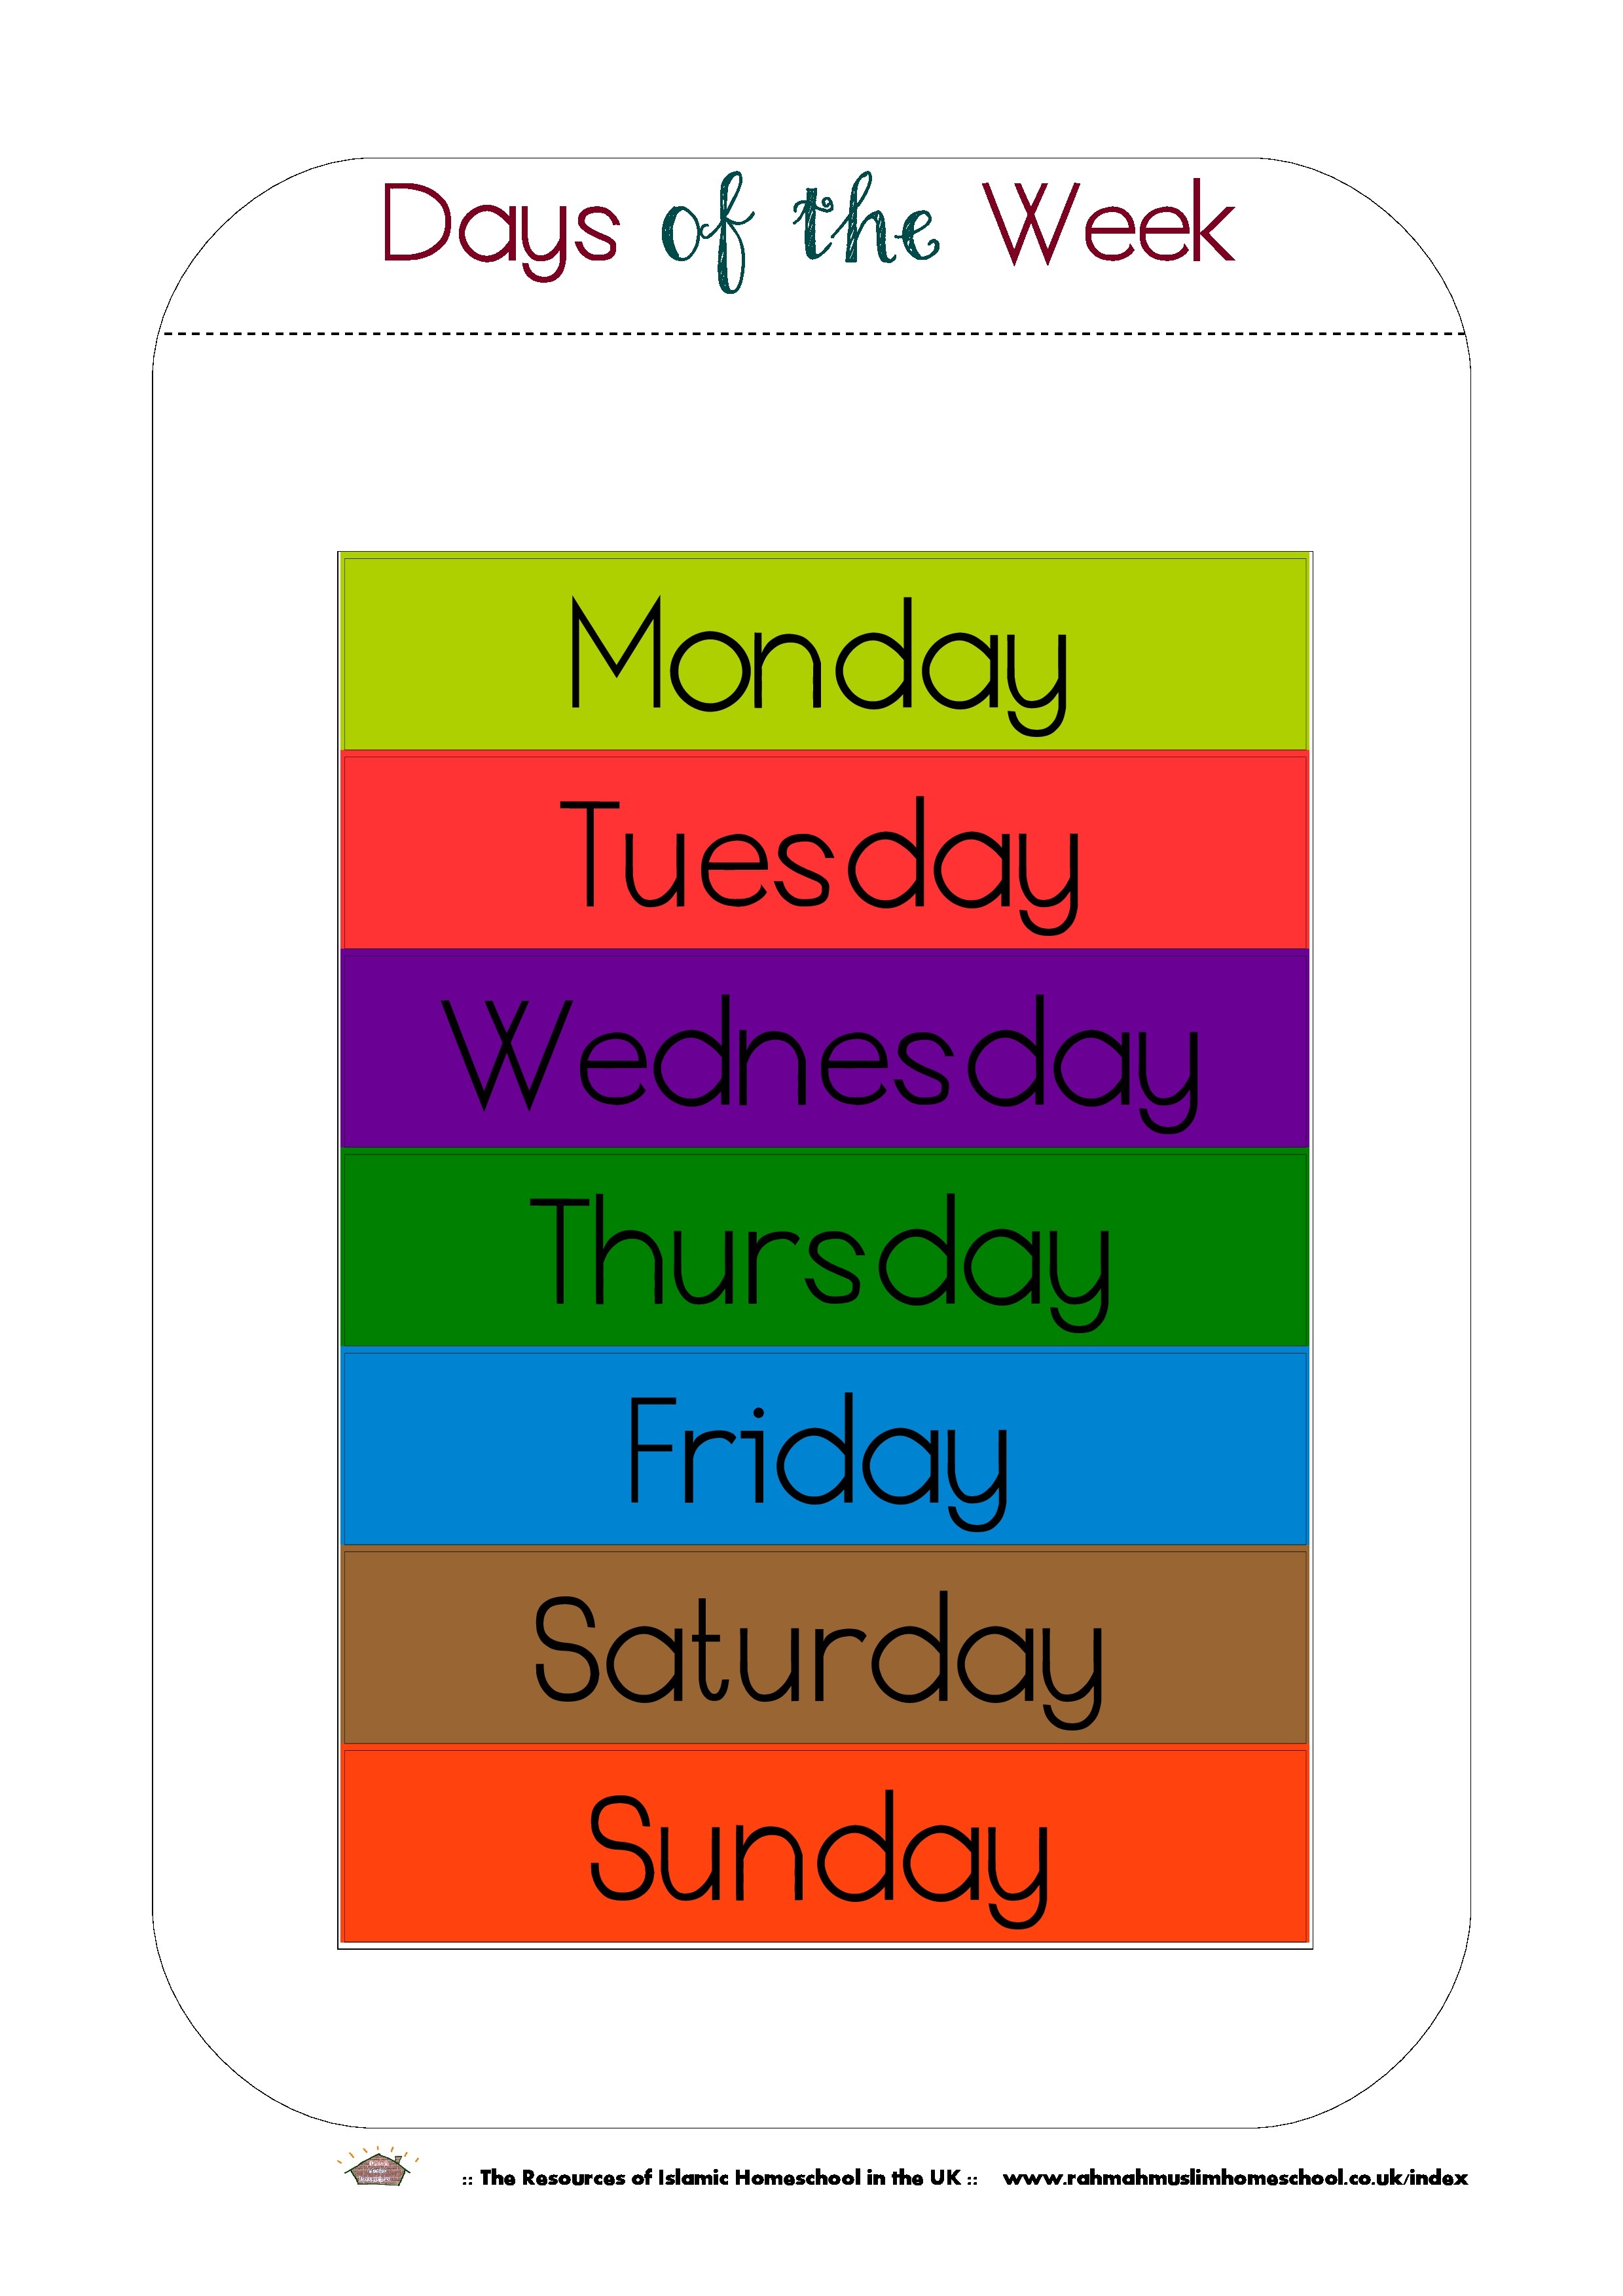 Free Printable Days Of The Week Workbook And Poster | The Resources - Free Printable Preschool Posters